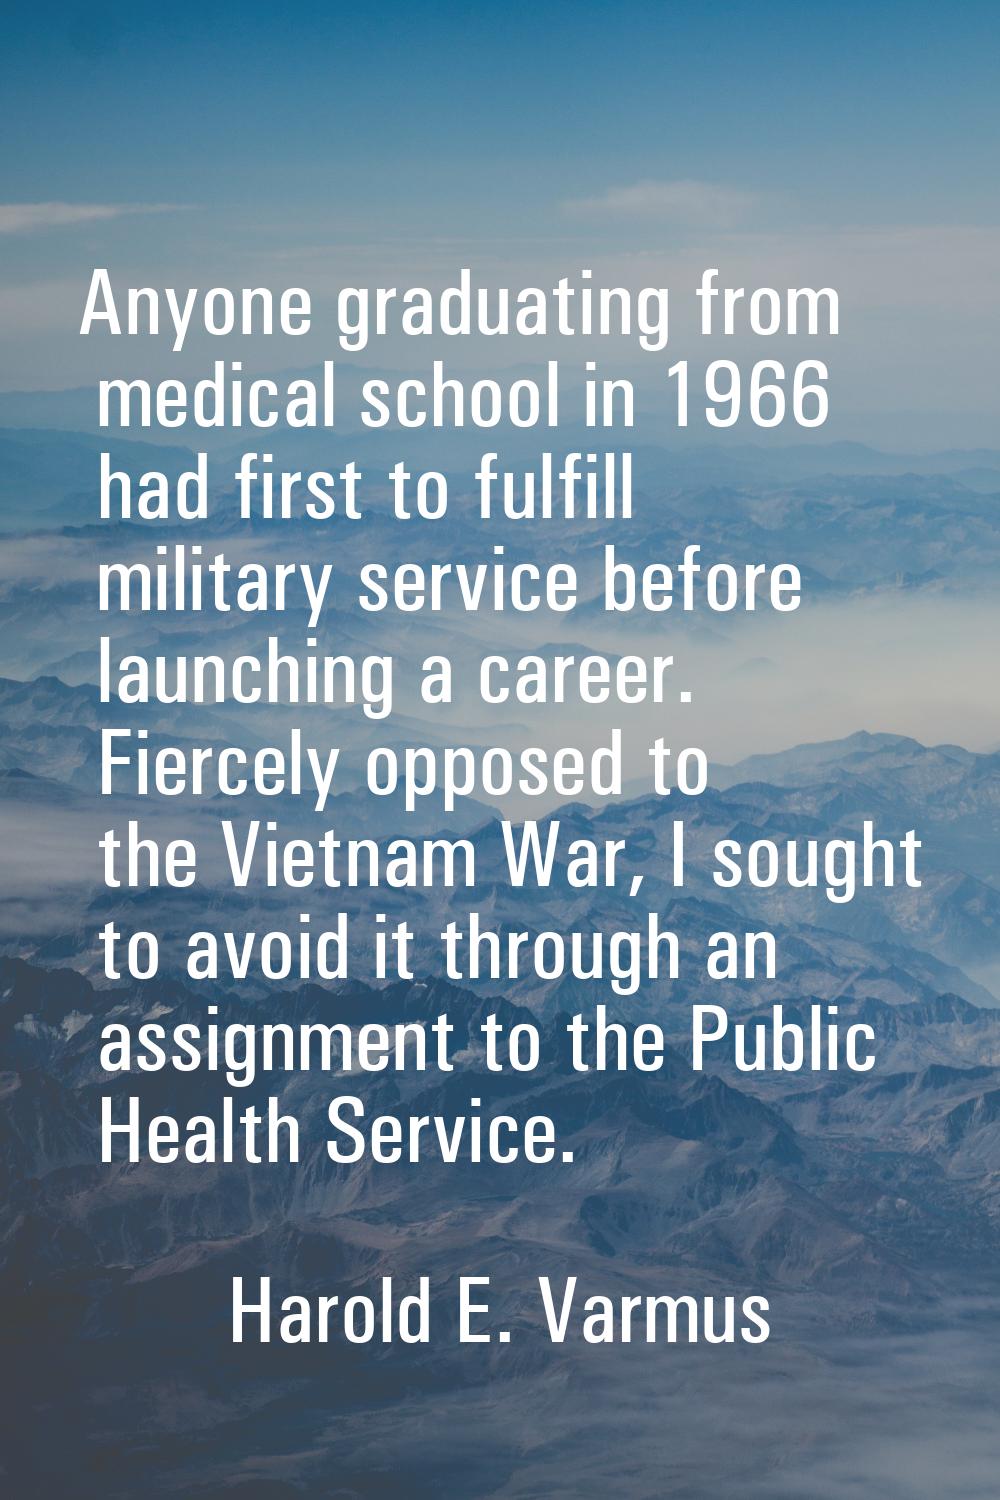 Anyone graduating from medical school in 1966 had first to fulfill military service before launchin